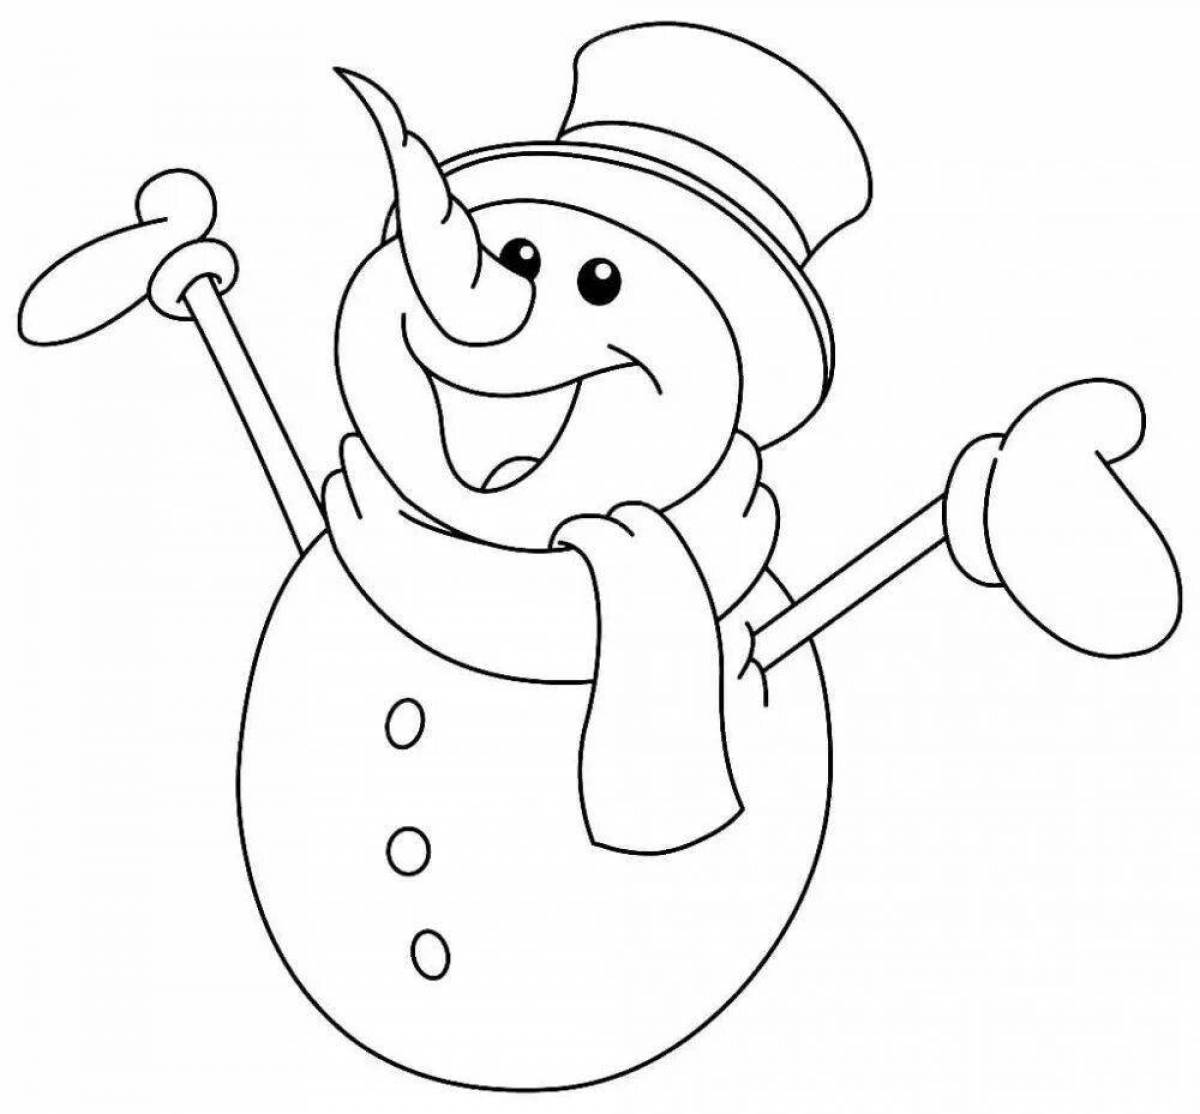 Fancy coloring funny snowman